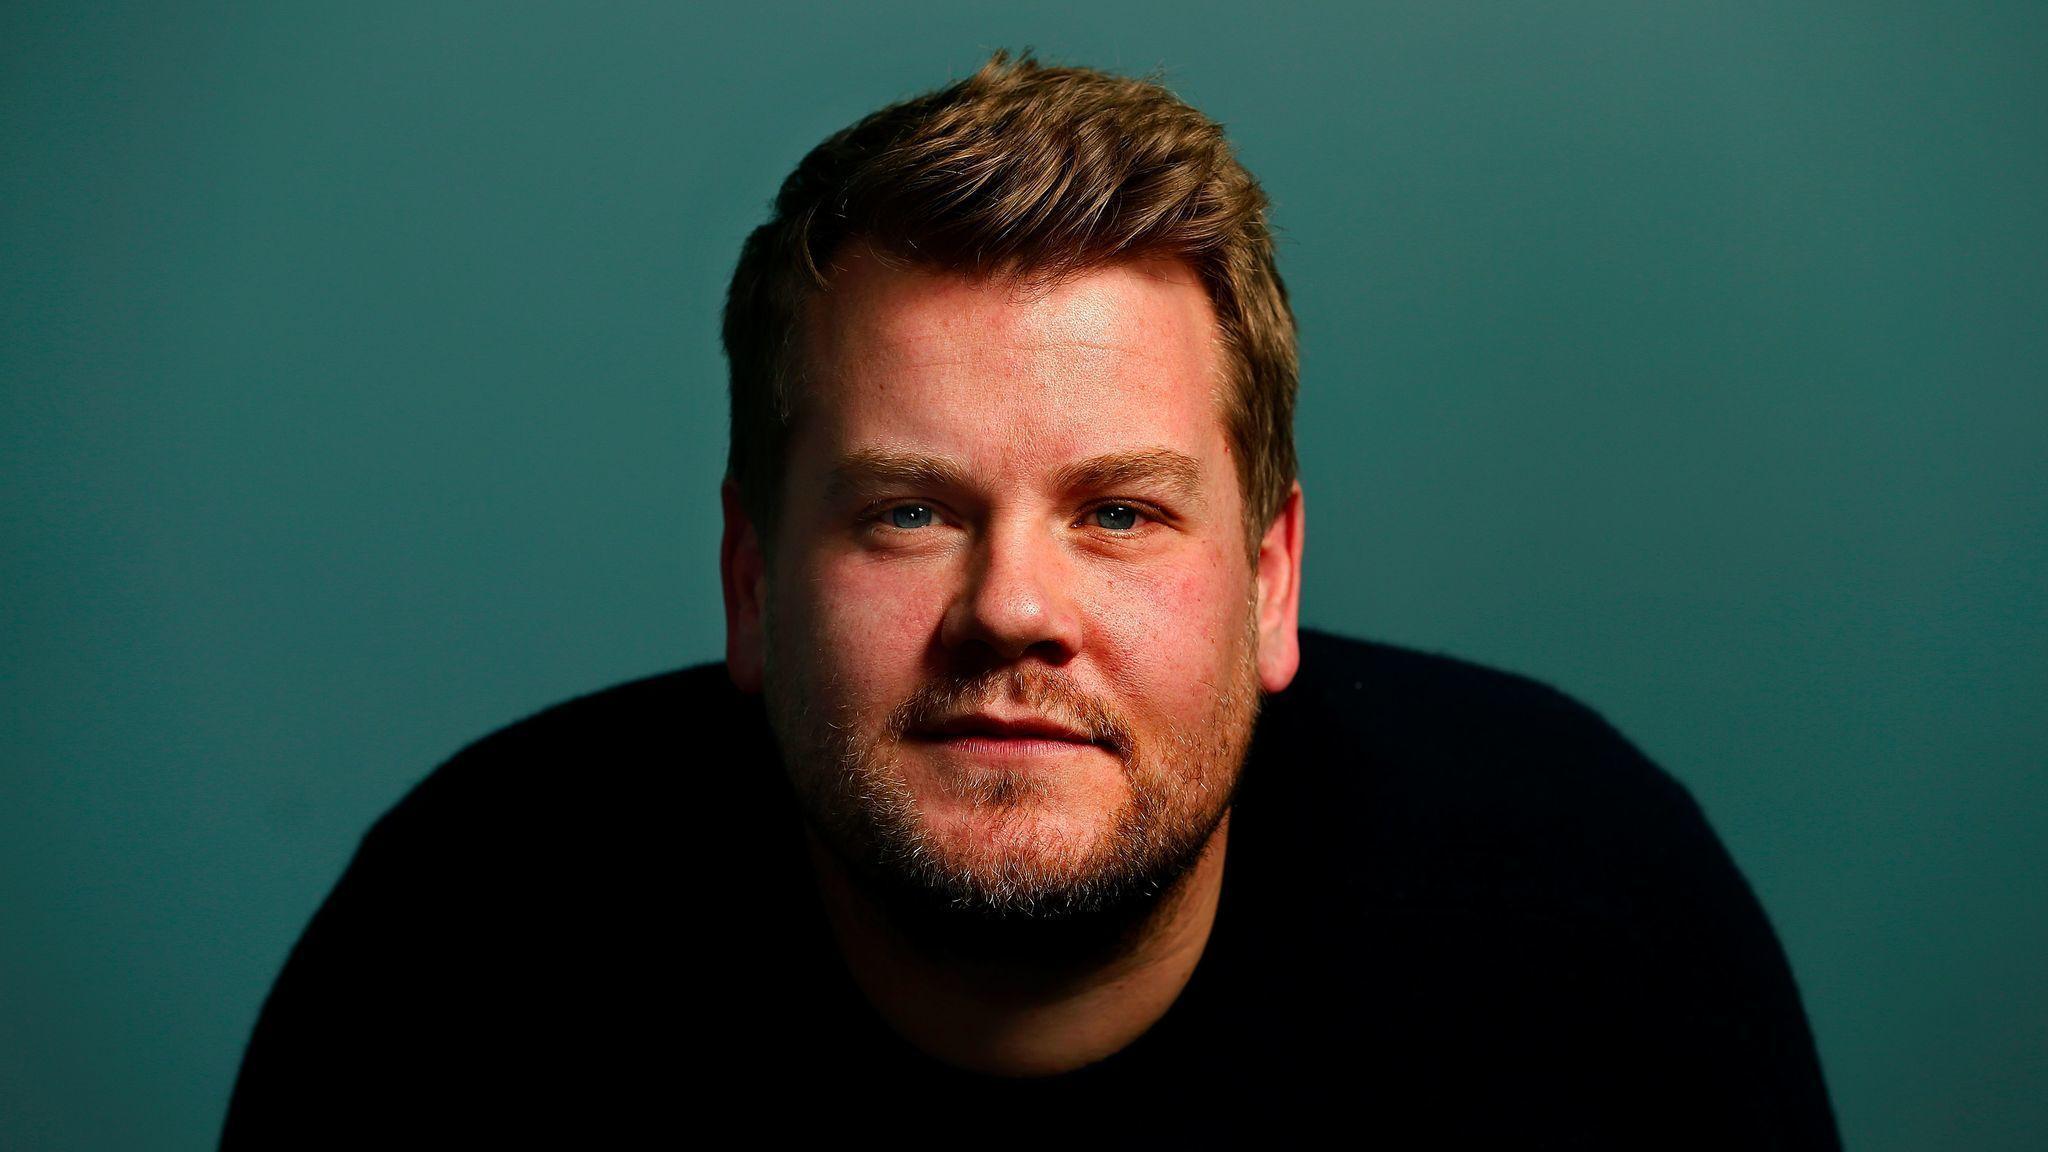 James Corden reaches out to the 'strong, proud, caring people'